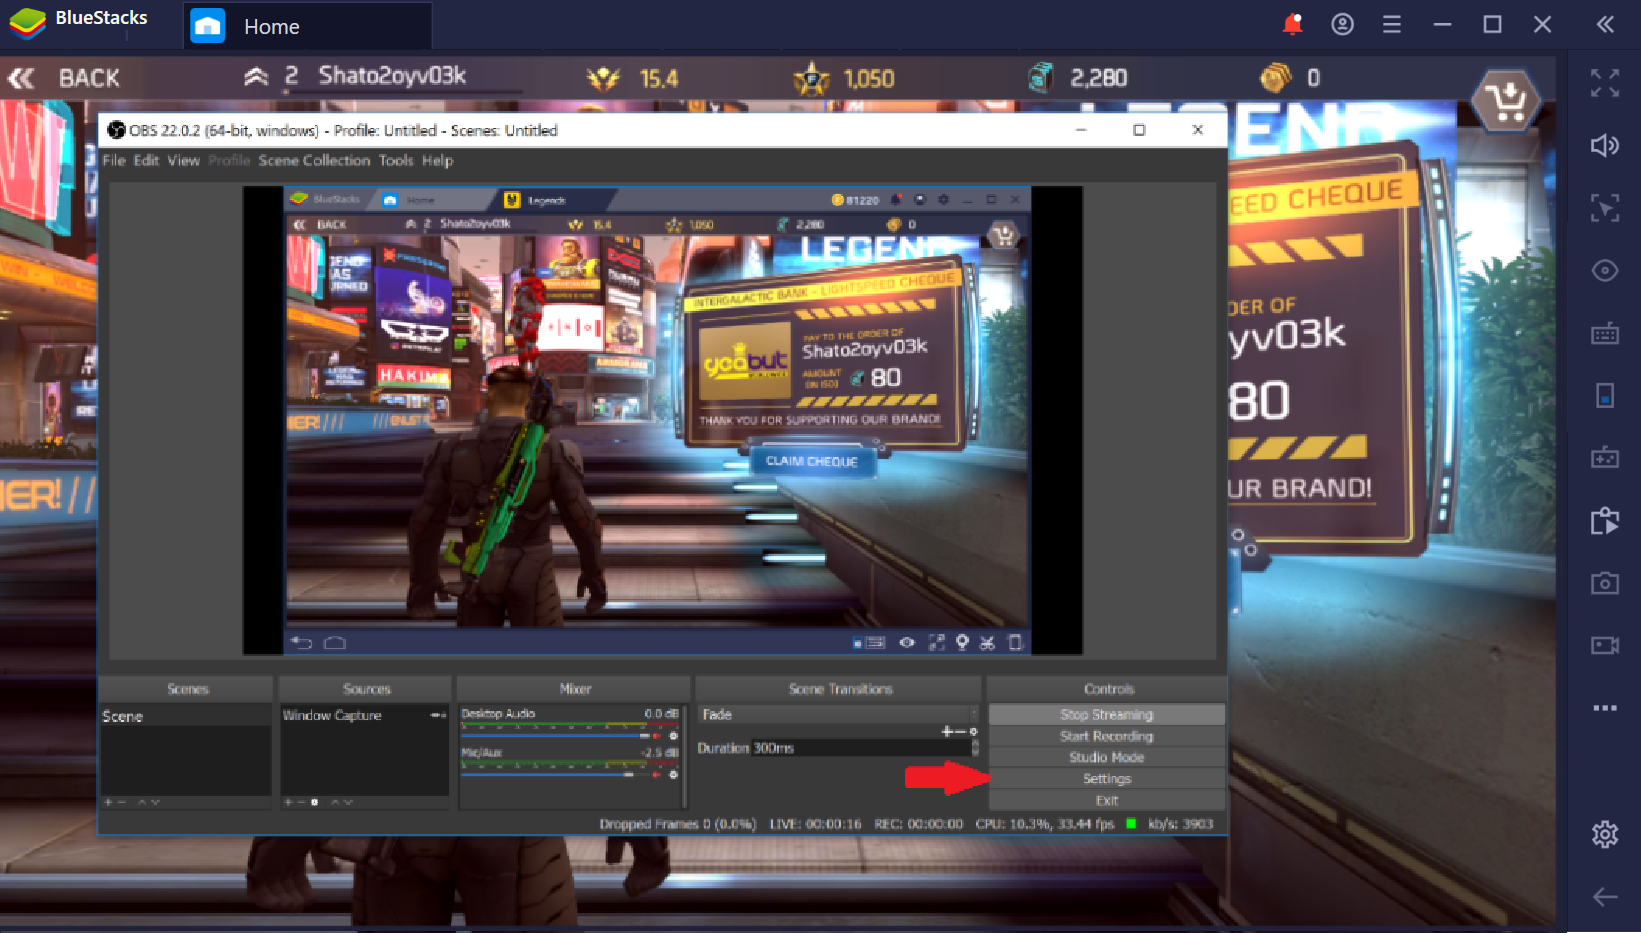 bluestacks game not showing obs